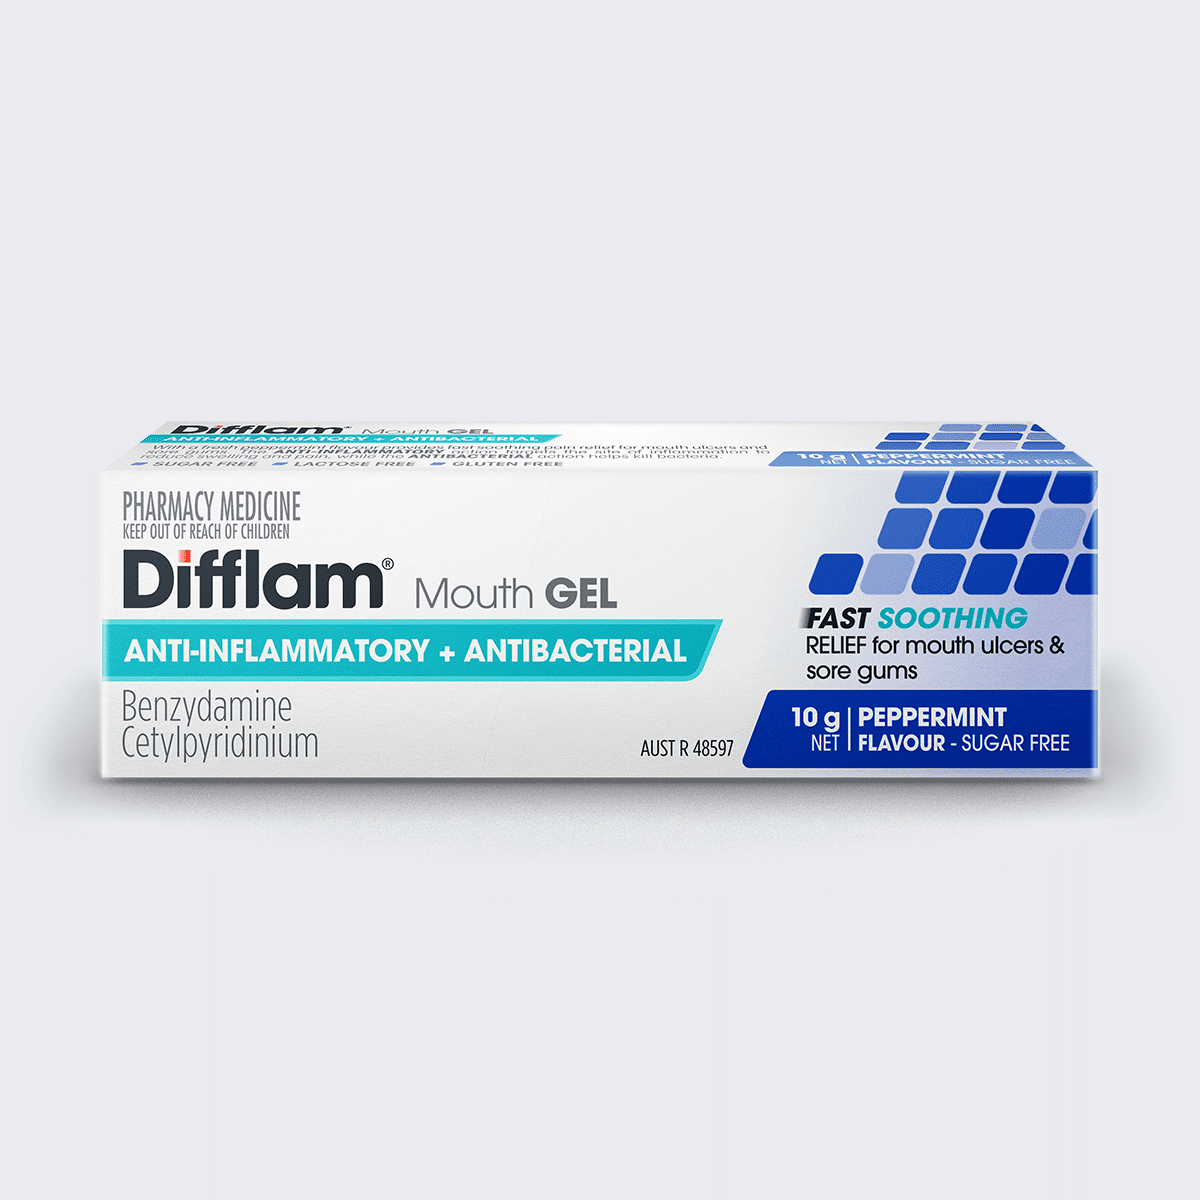 Difflam mouth gel includes an anaesthetic and an anti-inflammatory to soothe mouth ulcers and sore gums.